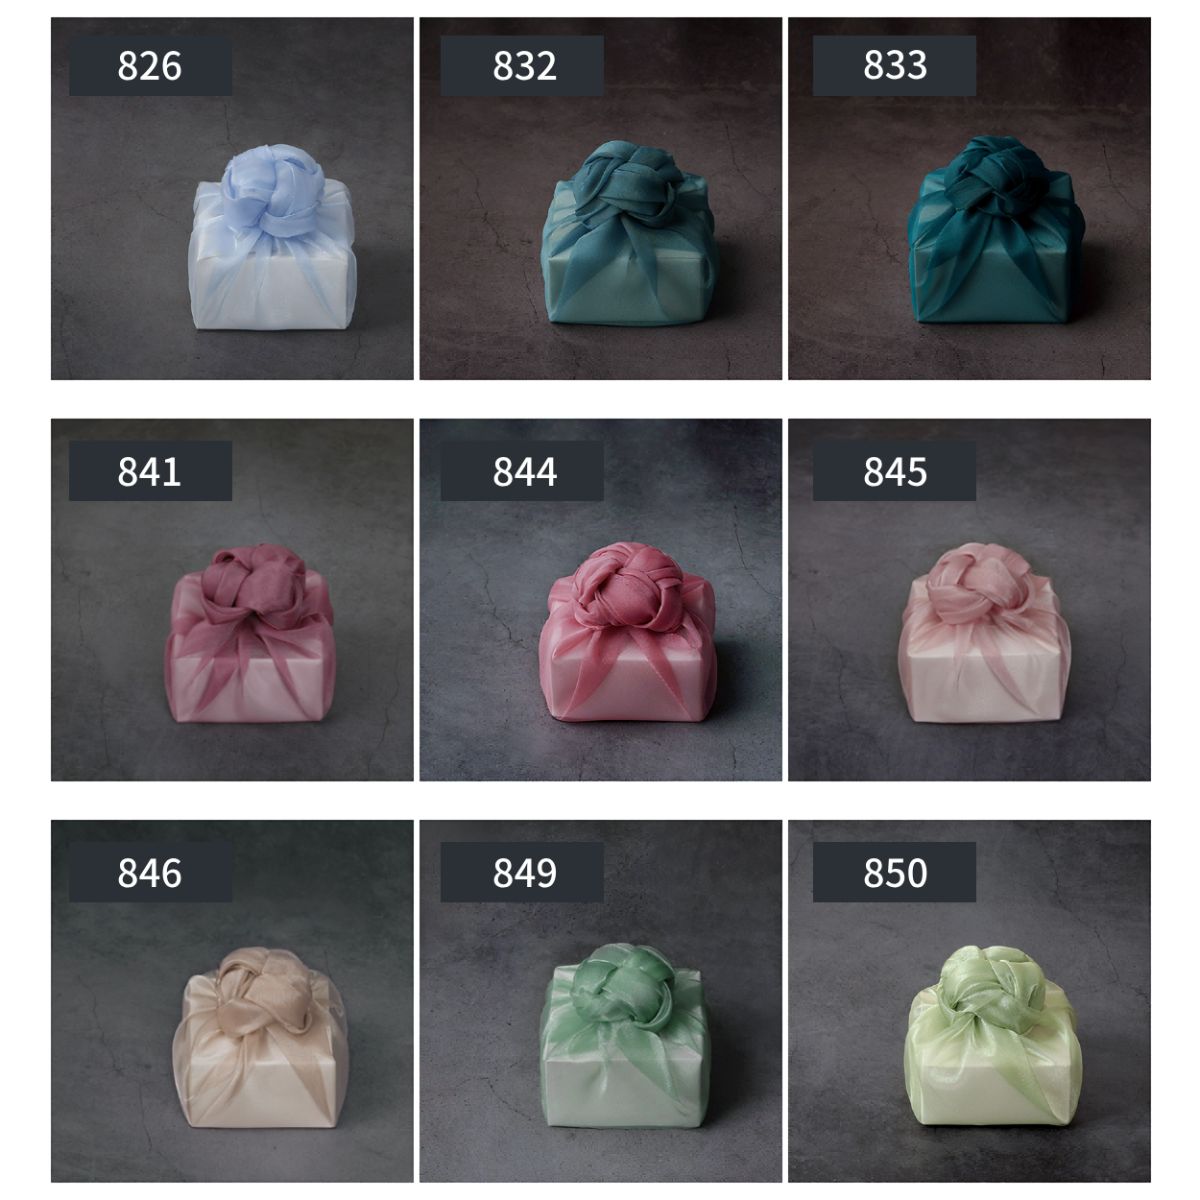 nine color of Bojagi. the first row:sky blue,blue green,dark green. the second row:plum,rose,indie pink. the third row:beige,emerald green,light green.